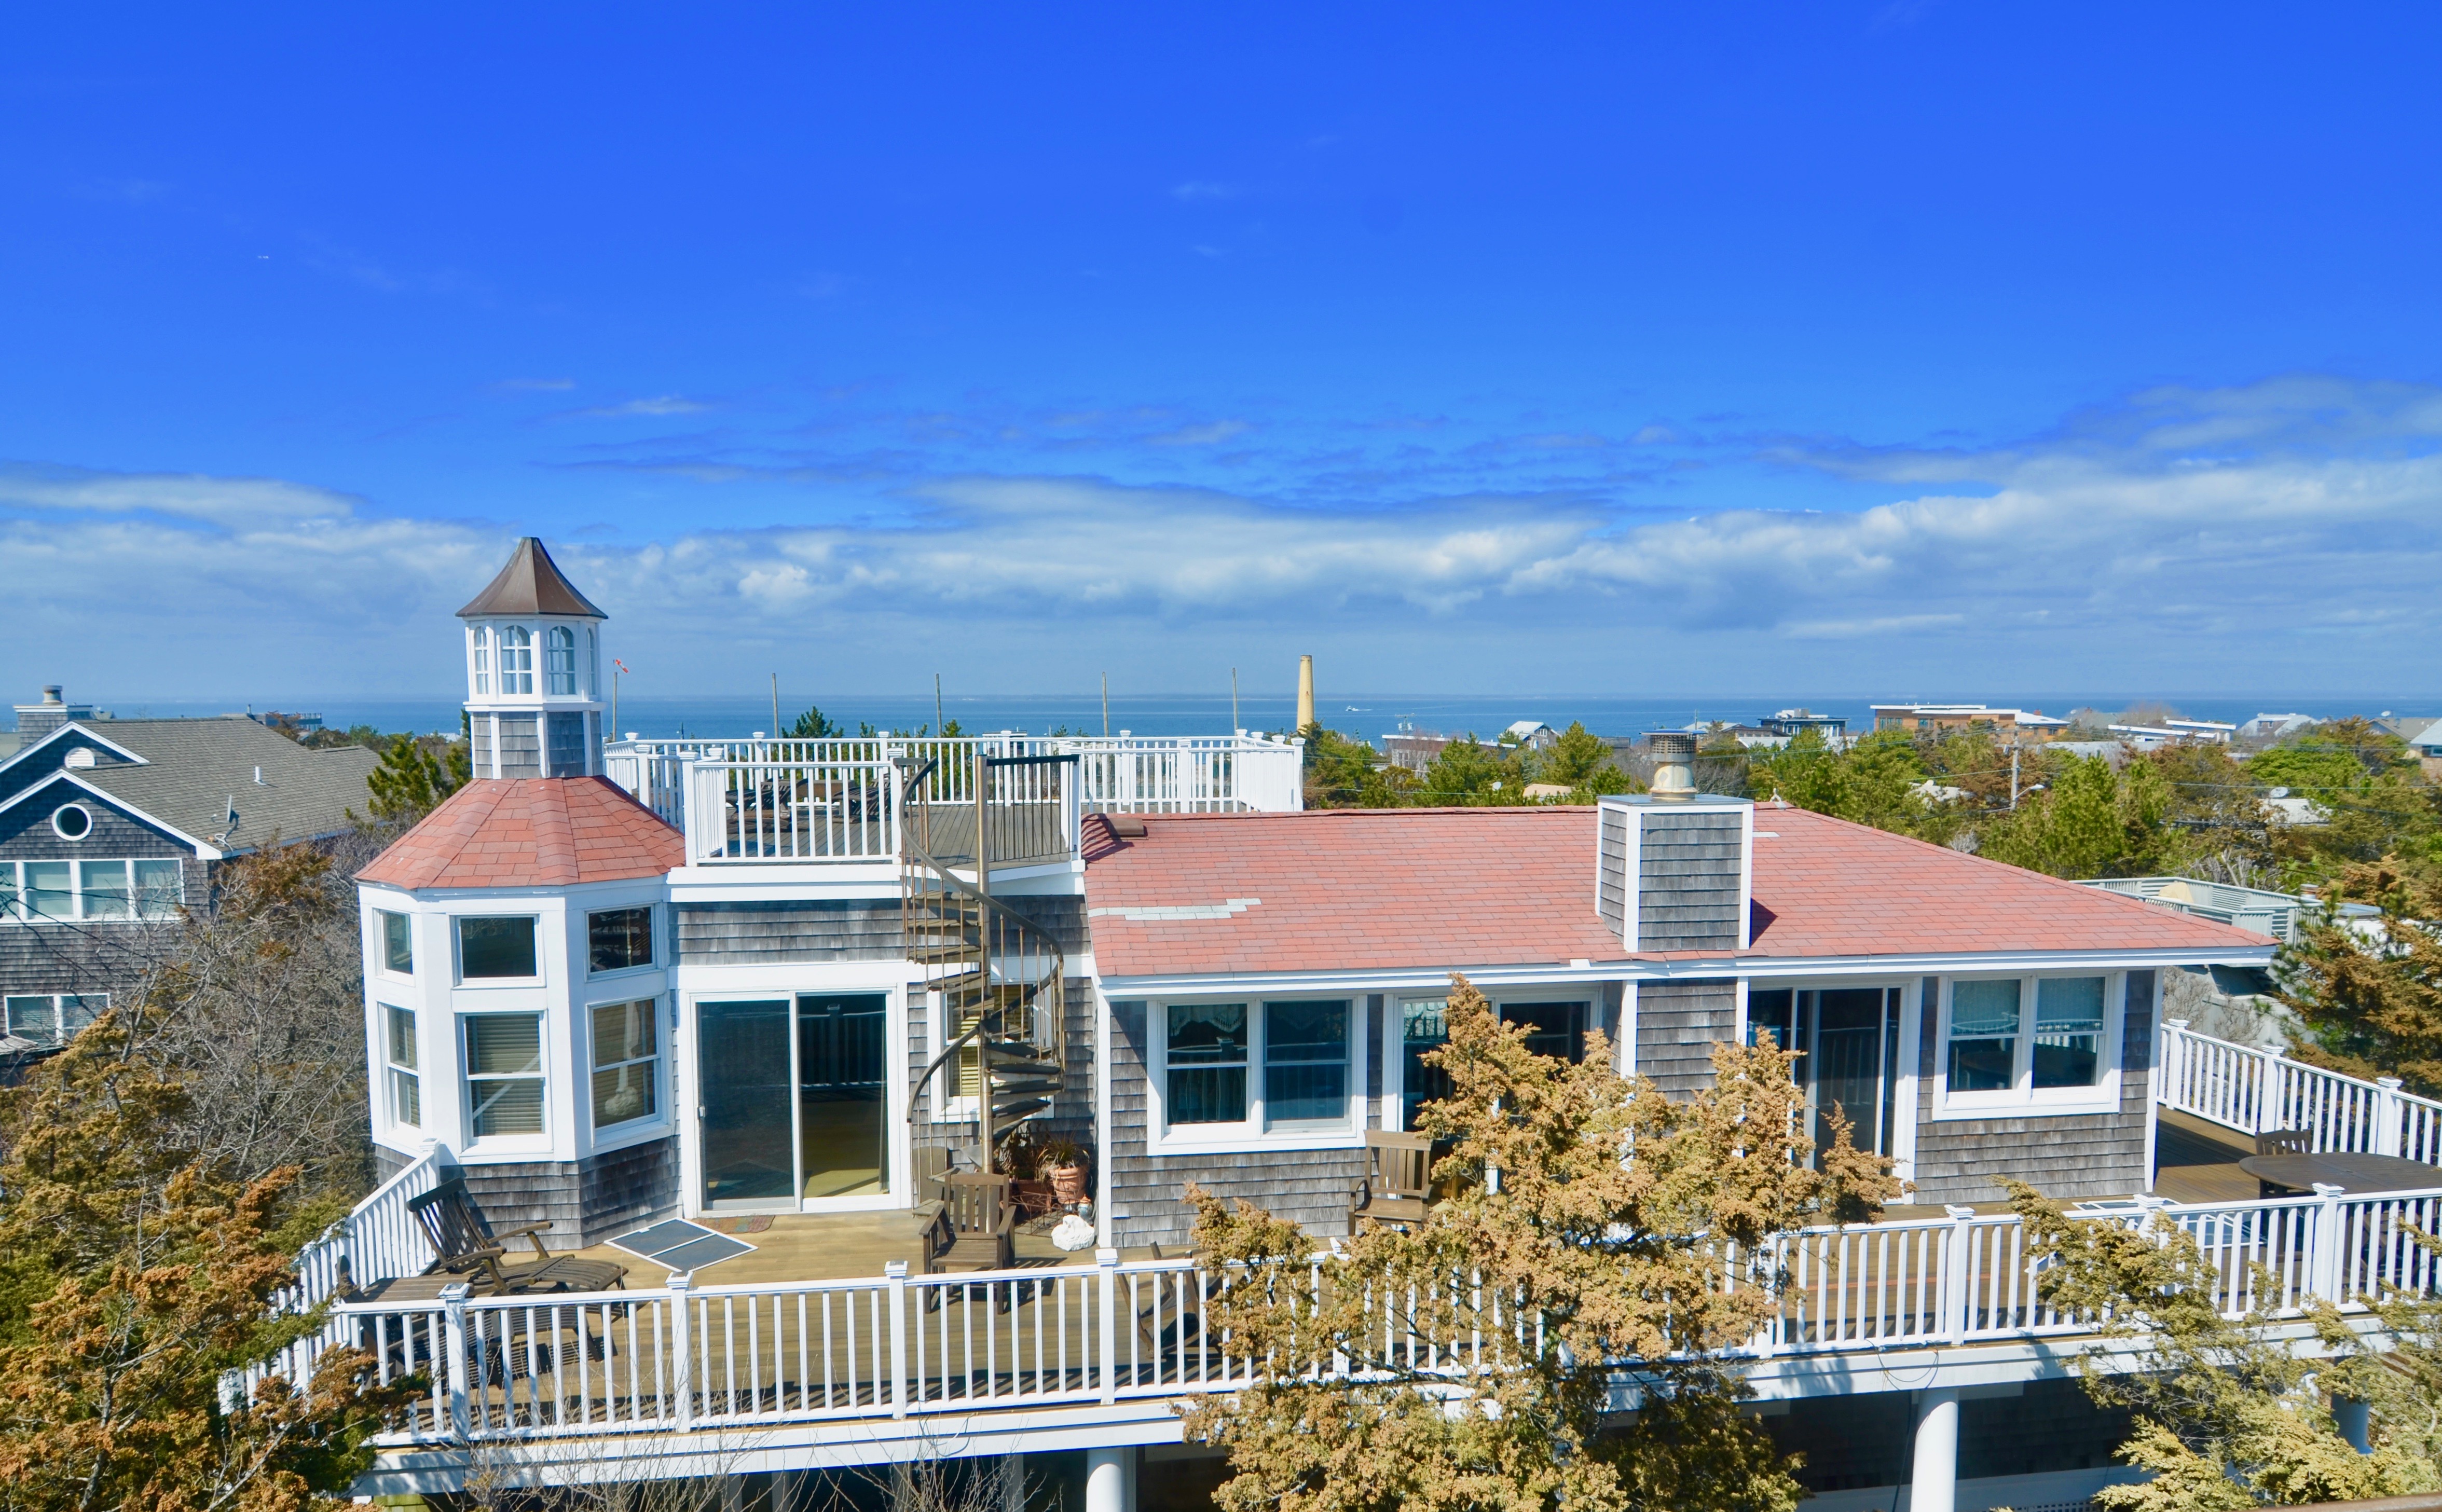 Stunning and spacious Seaview home. 3rd house back from the ocean. Multiple decks with views of the bay and the ocean. 4 bedrooms, 3 bathrooms. Amazing master suite. Open layout. Central A/C.
<br>


